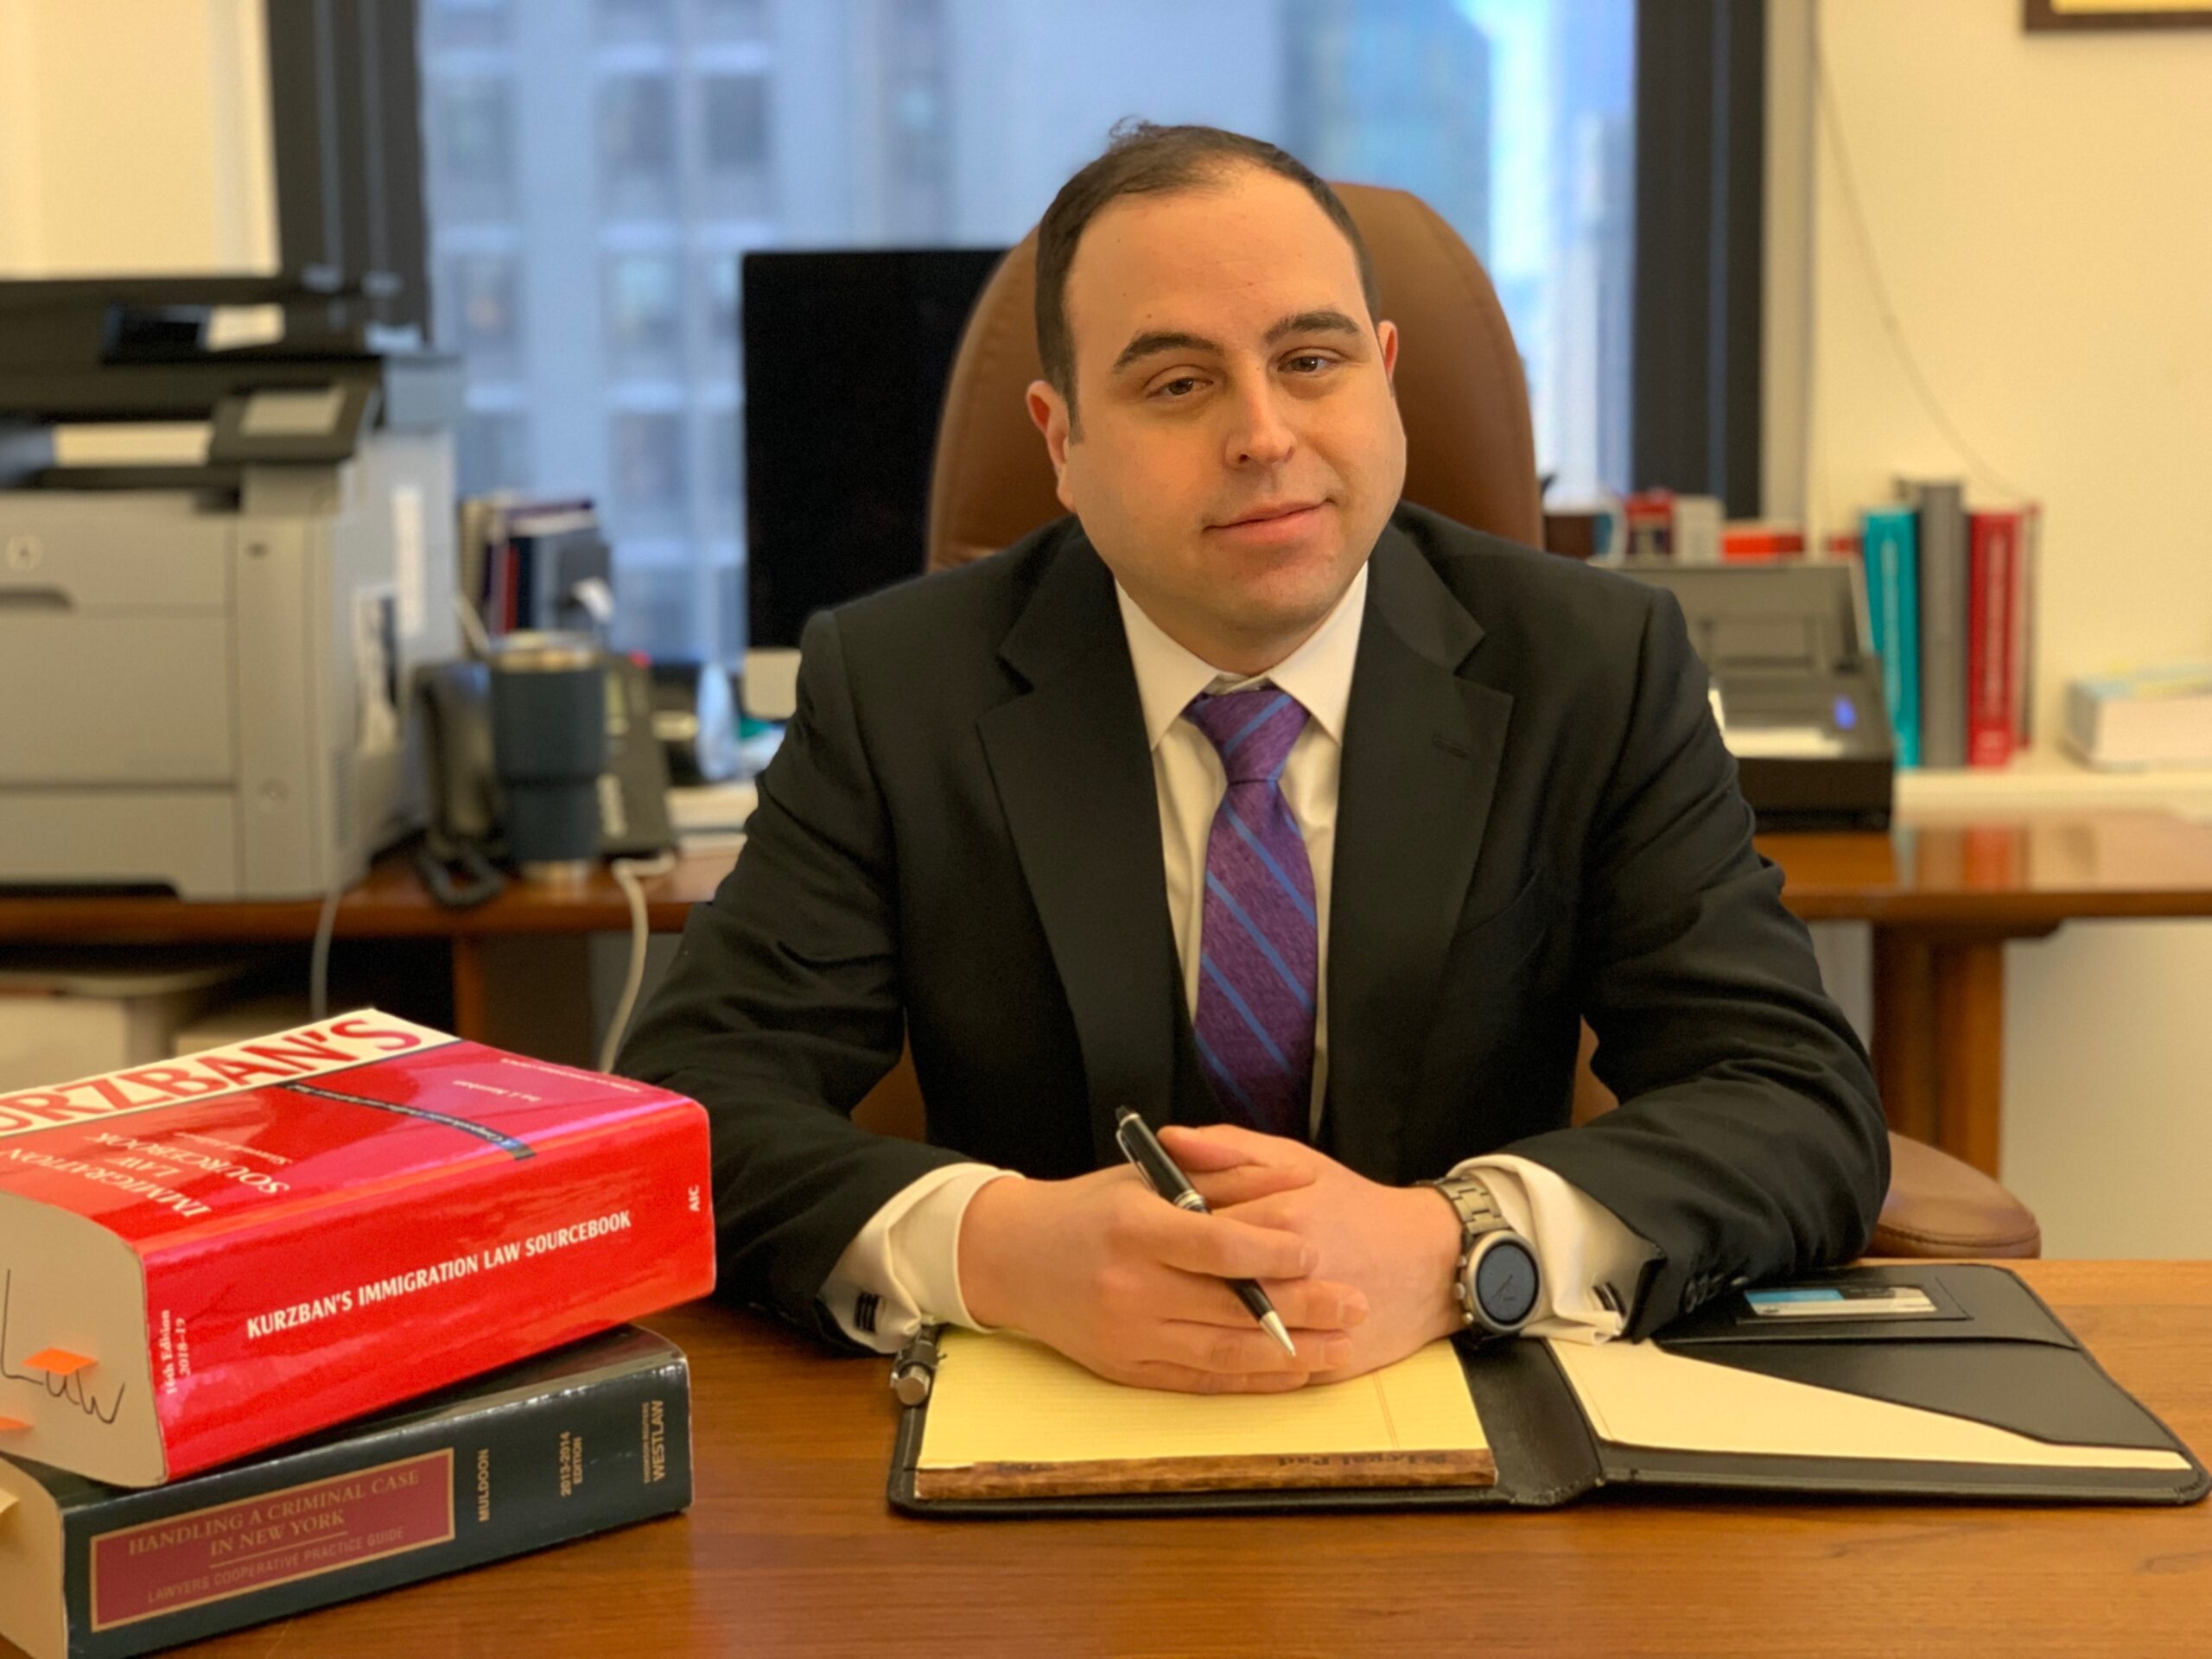 Attorney Lee A. Koch sitting at a desk with his hands folder wearing a black suit and purple and blue striped tie. With a red bound "Kurzban's Immigration Sourcebook" and a blue bound "Handling a Criminal Case in New York" to his right and a yellow legal notepad under his hands.